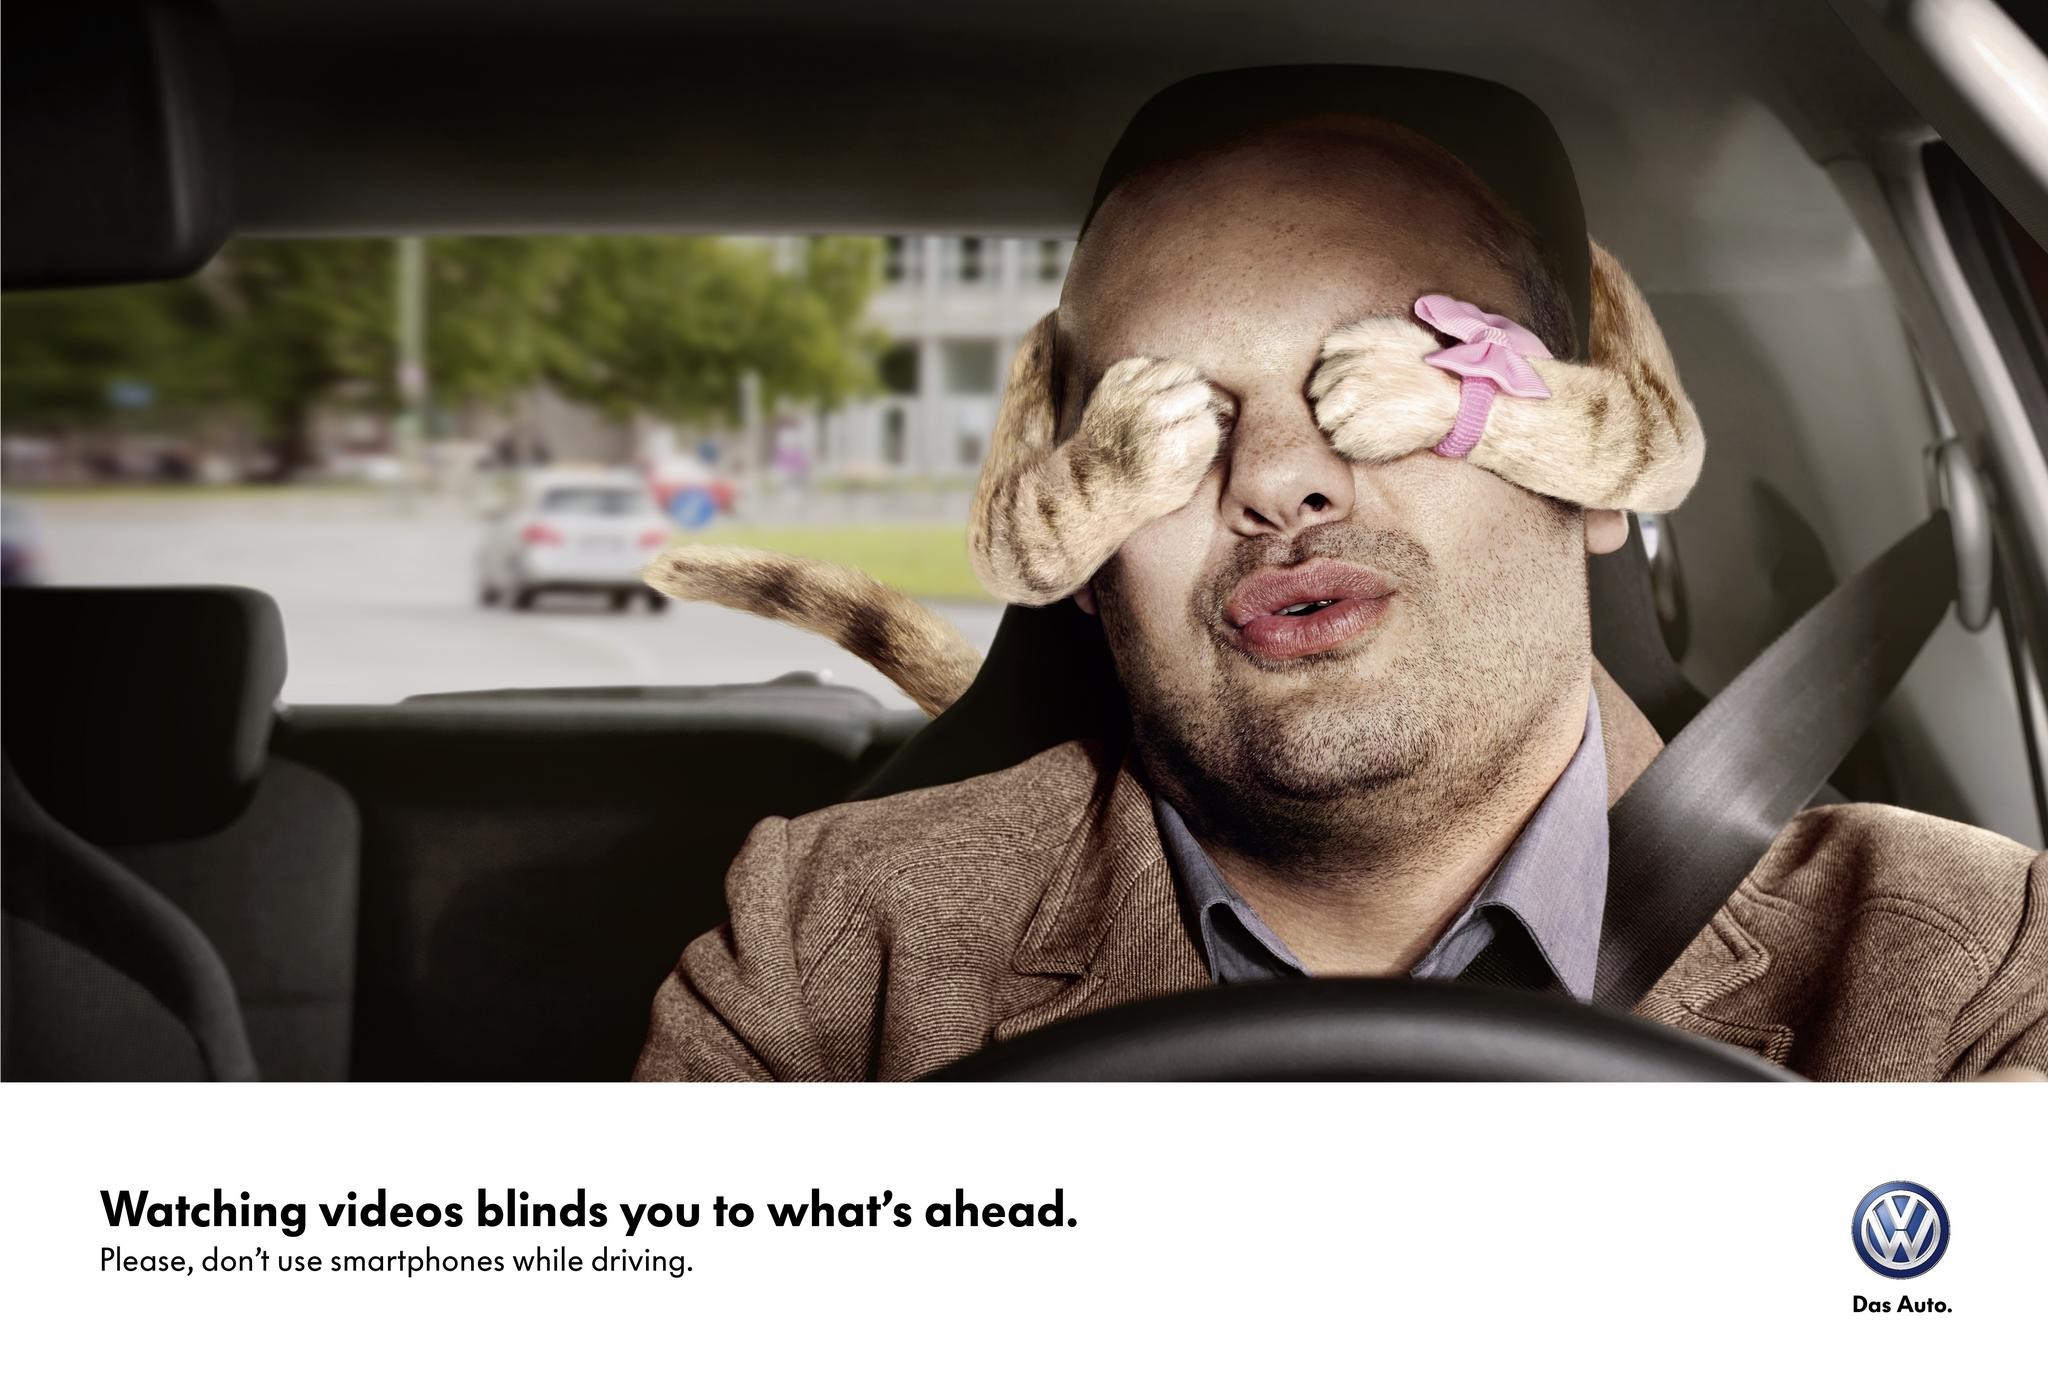 IMAGE/ROAD SAFETY